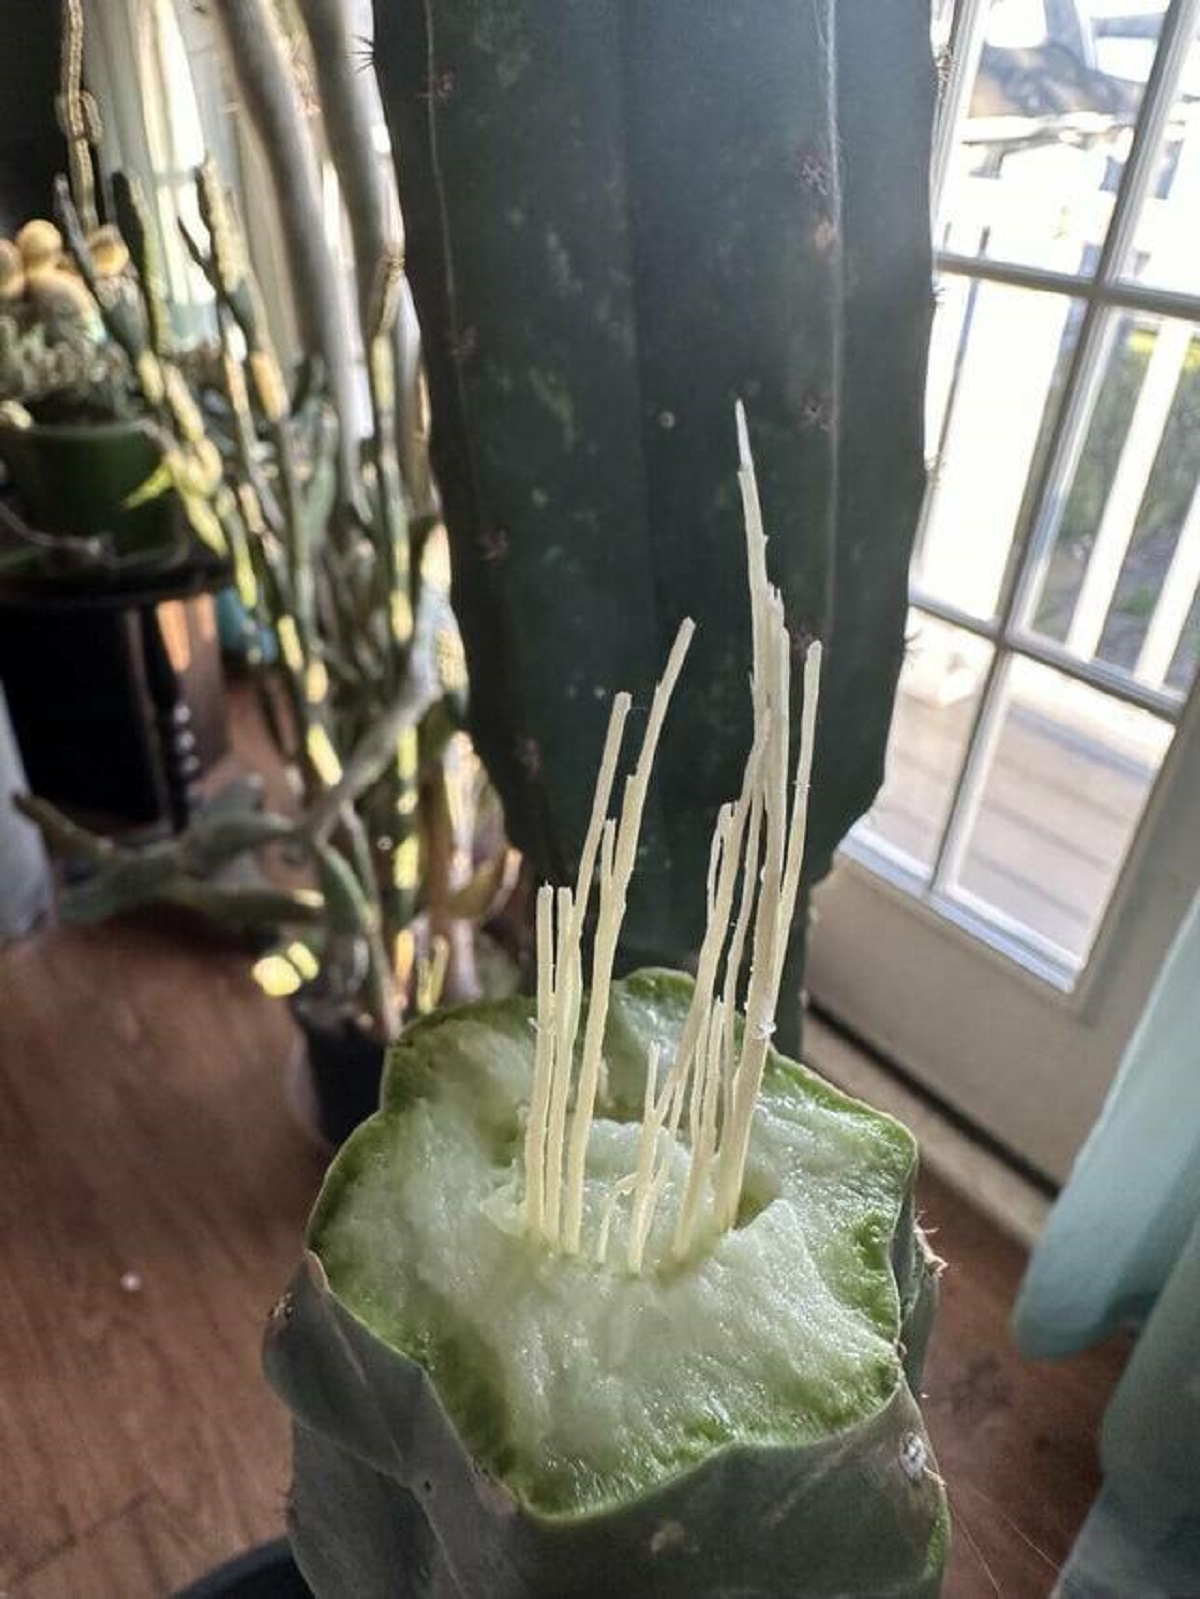 "My 7ft tall cactus snapped, exposing the spines that hold it together"